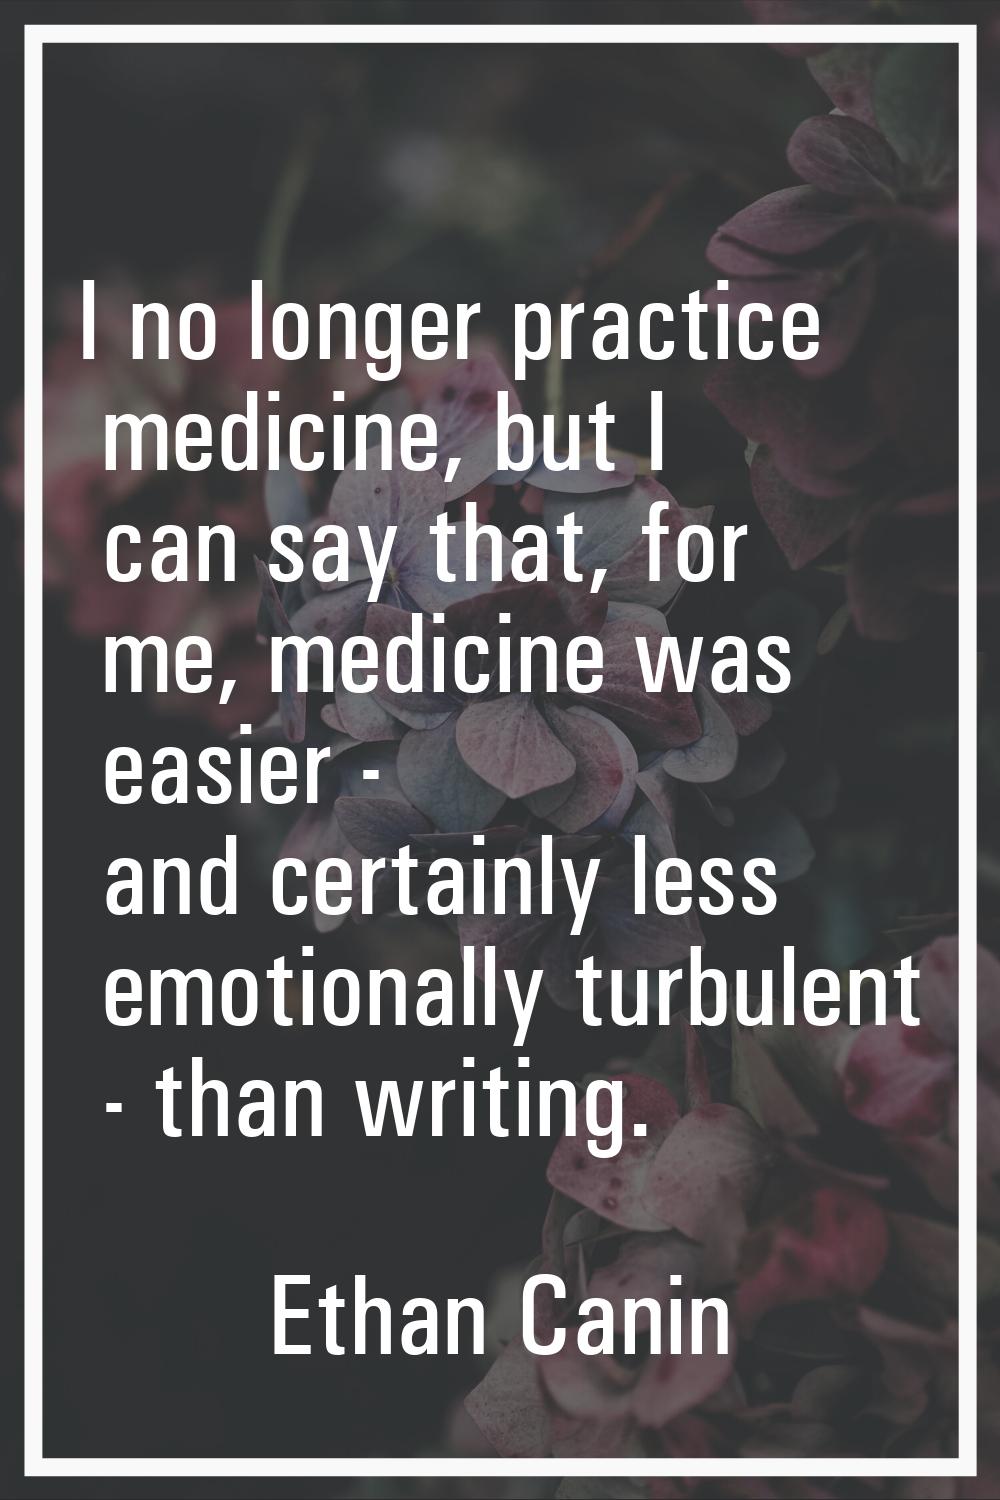 I no longer practice medicine, but I can say that, for me, medicine was easier - and certainly less